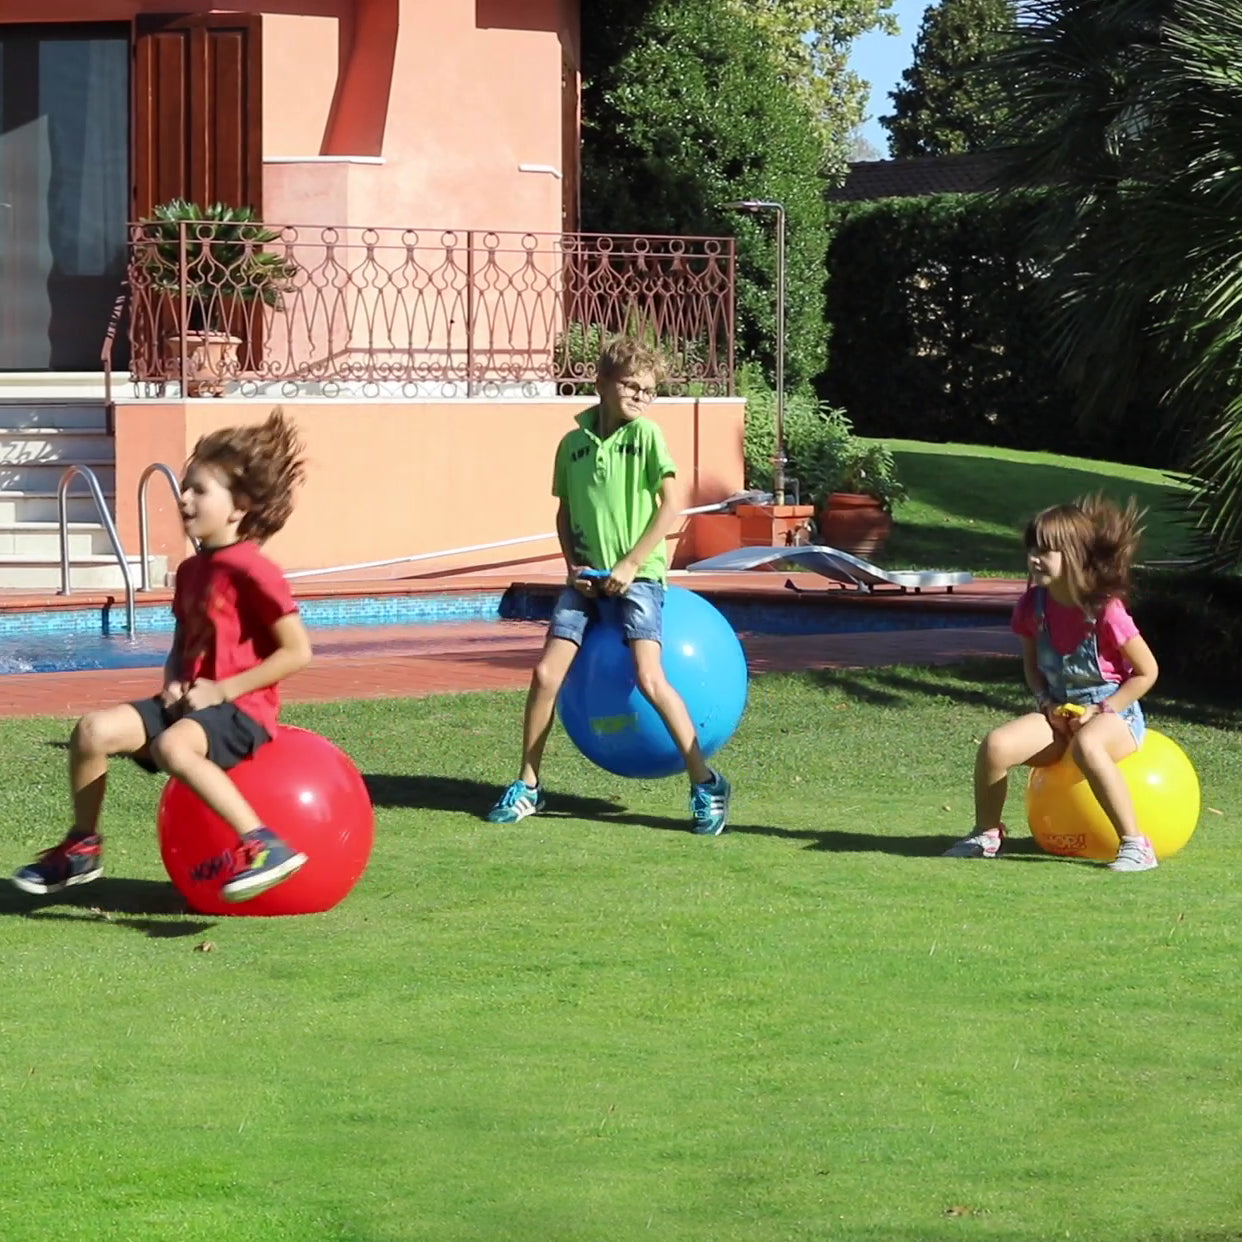 Children playing on the Hop balls